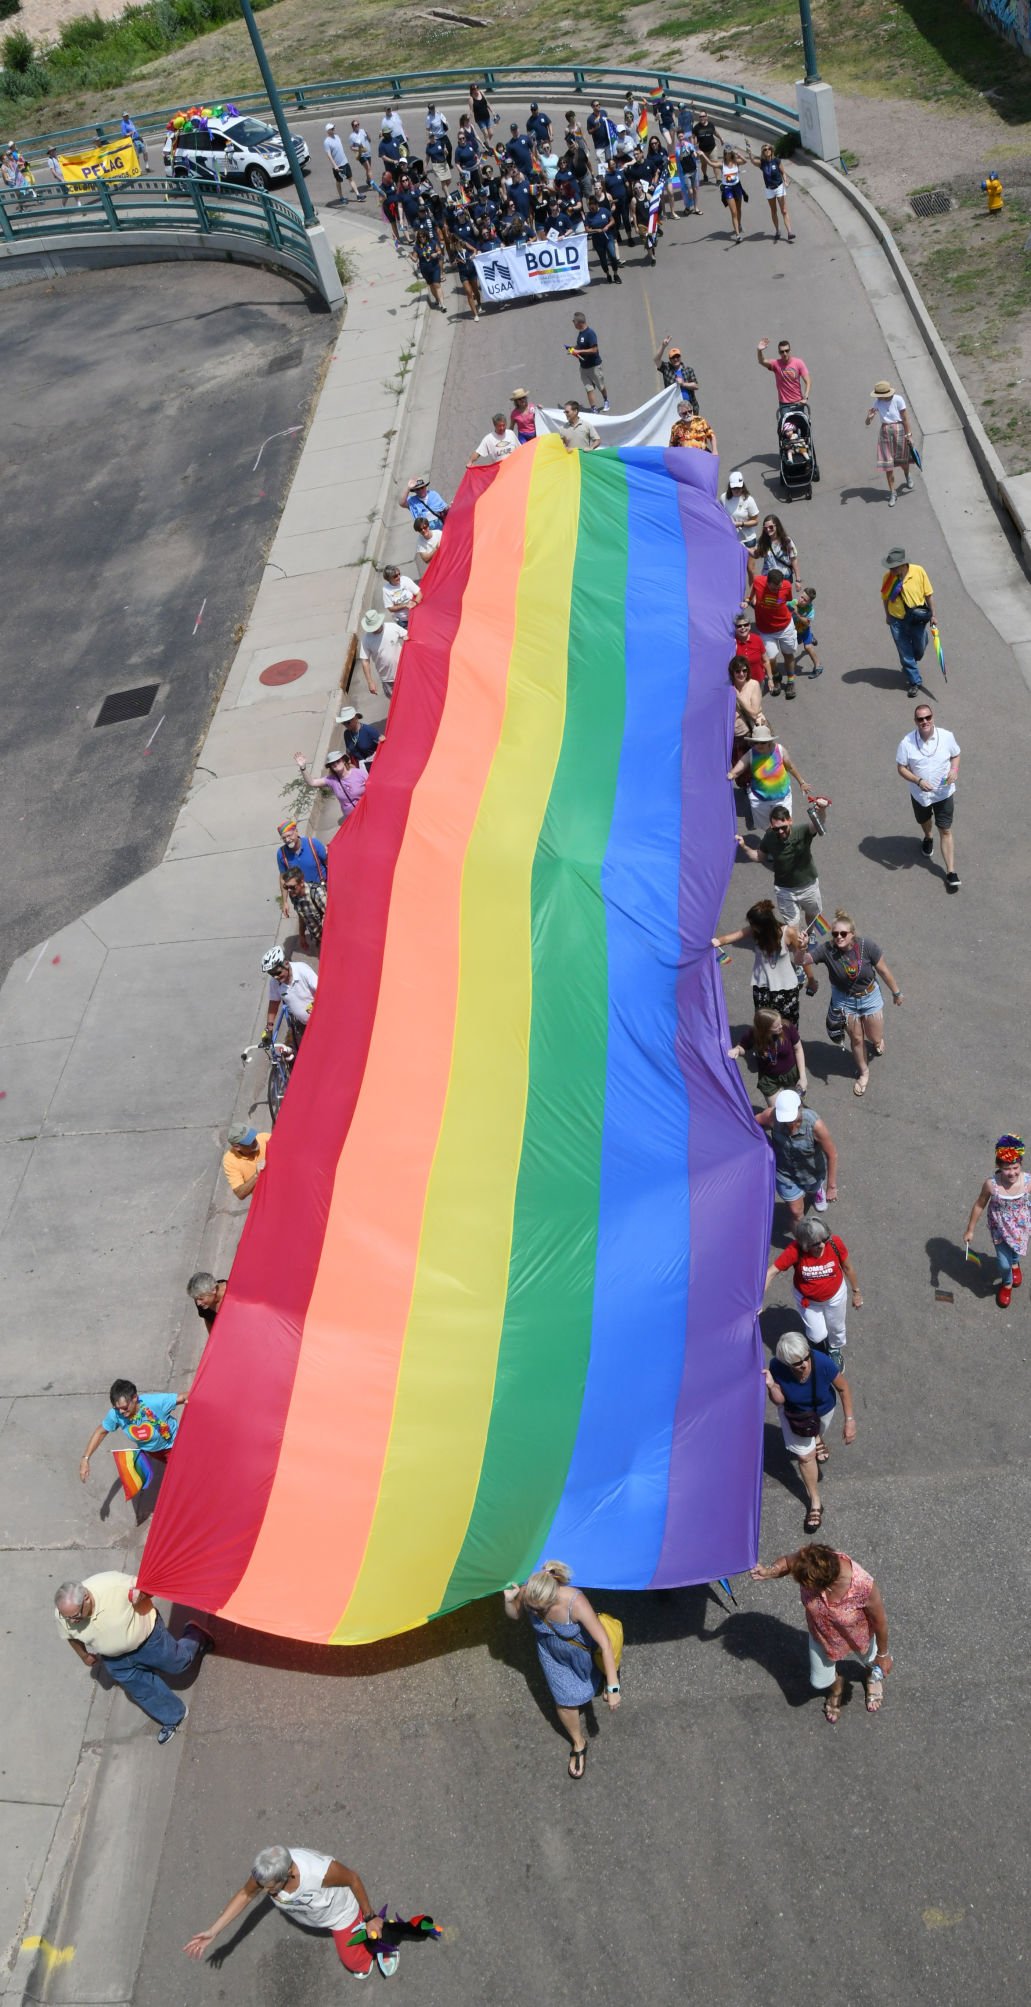 Large turnout for Colorado Springs' PrideFest reflects community